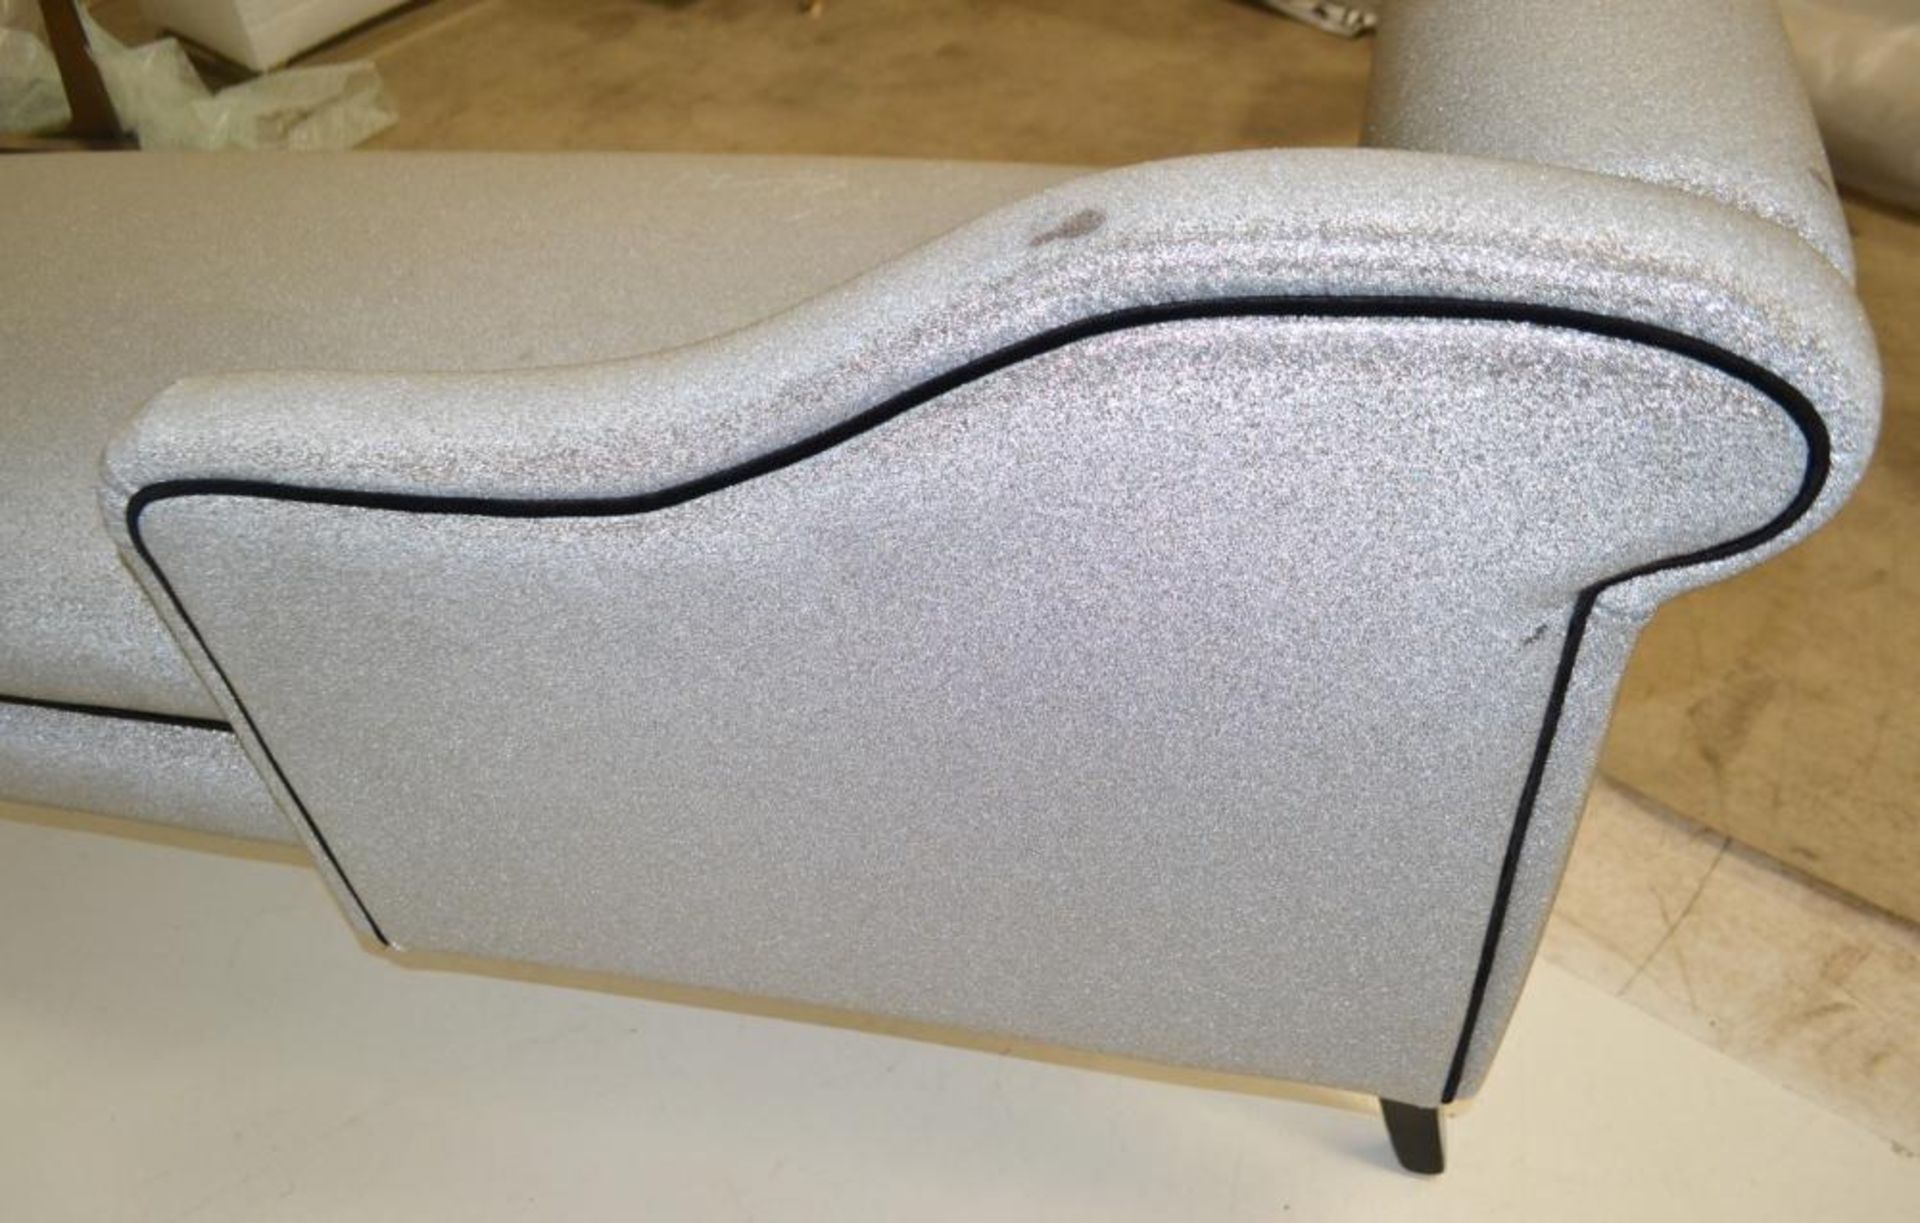 1 x Chaise Lounge Chair Finished In Silver Glitter - Ref: BLT376 - CL380 - NO VAT ON THE HAMMER - - Image 7 of 8